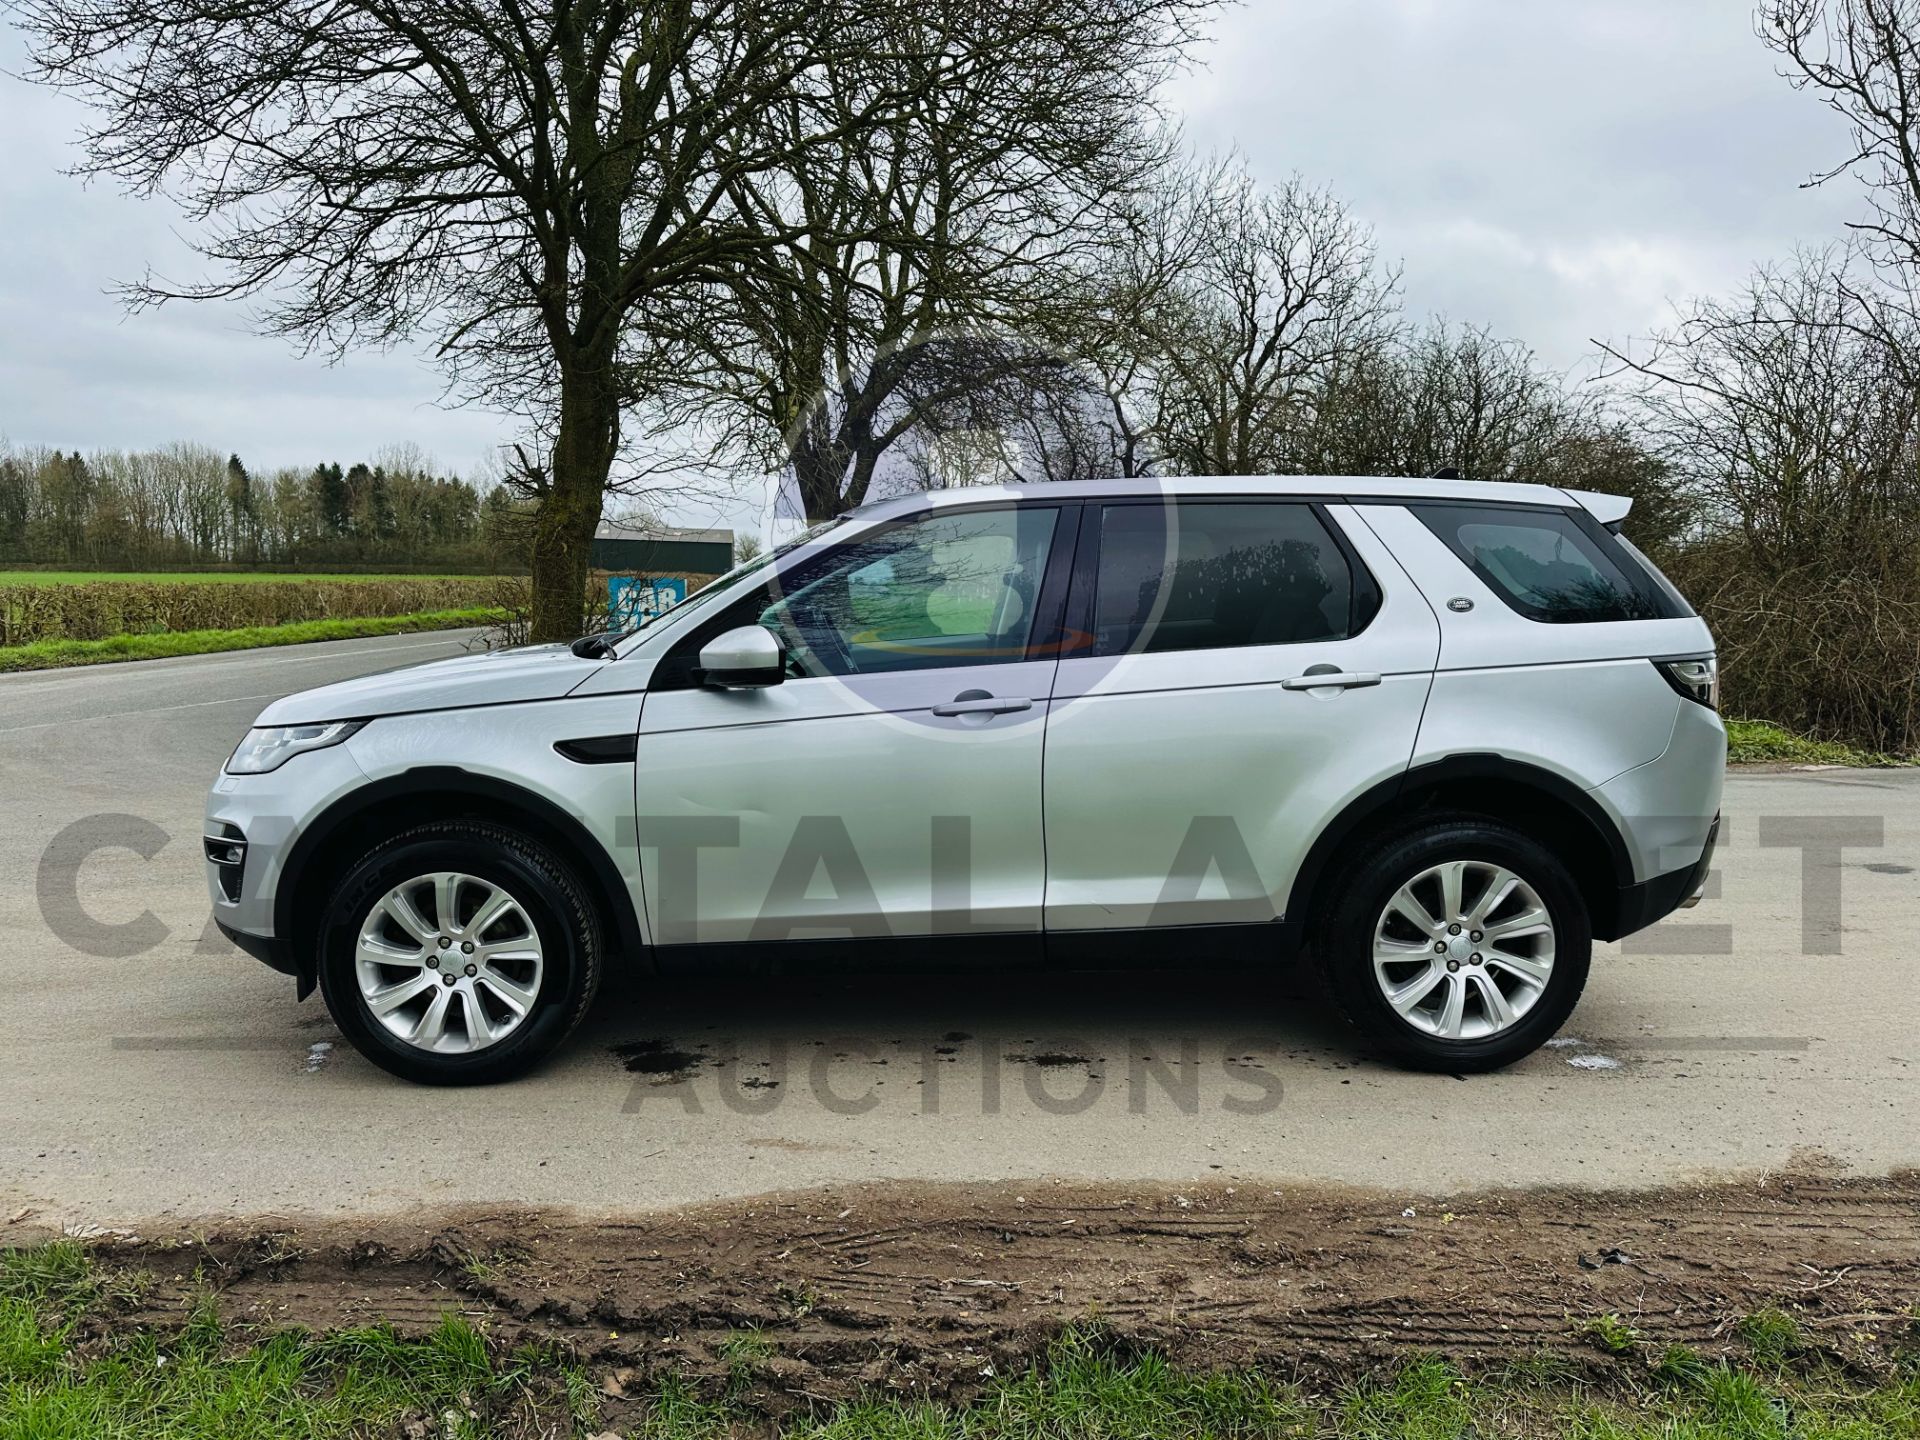 LAND ROVER DISCOVERY SPORT *SE TECH* 7 SEATER SUV (65 REG - EURO 6) 2.0 TD4 - AUTOMATIC - Image 6 of 38